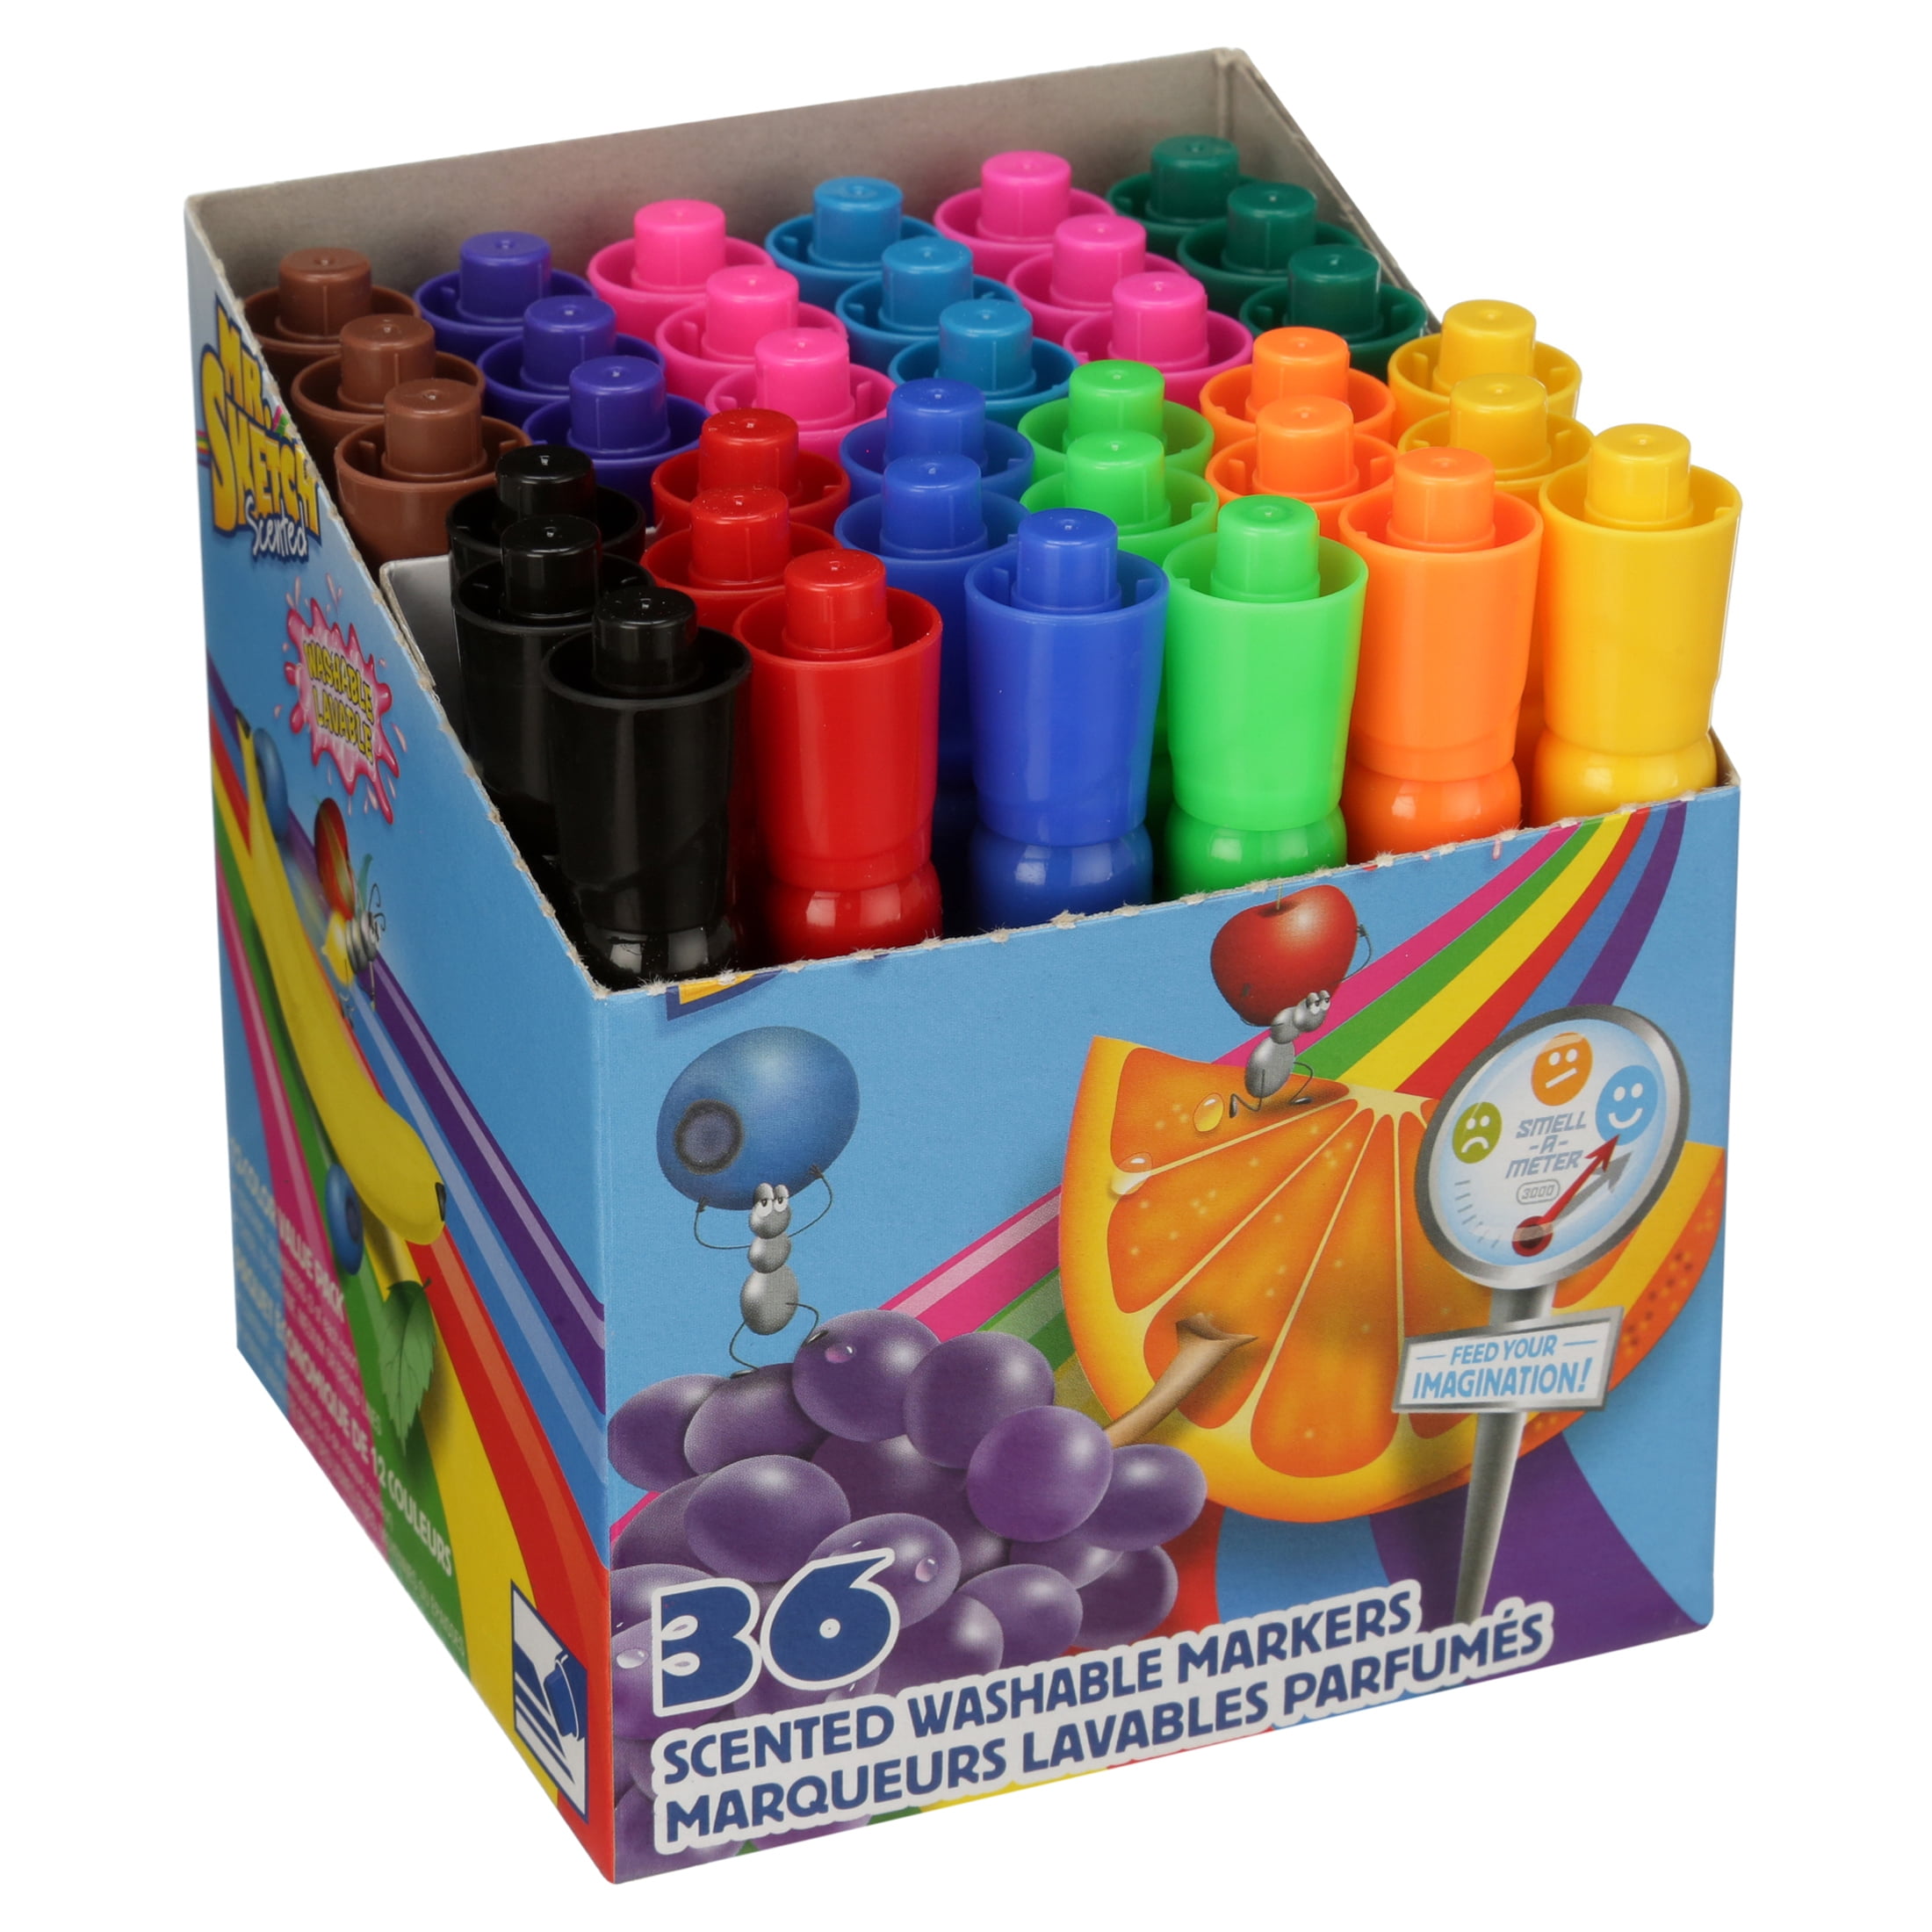 Mr. Sketch® Scented Markers, Chisel Point, Assorted, Pack Of 14